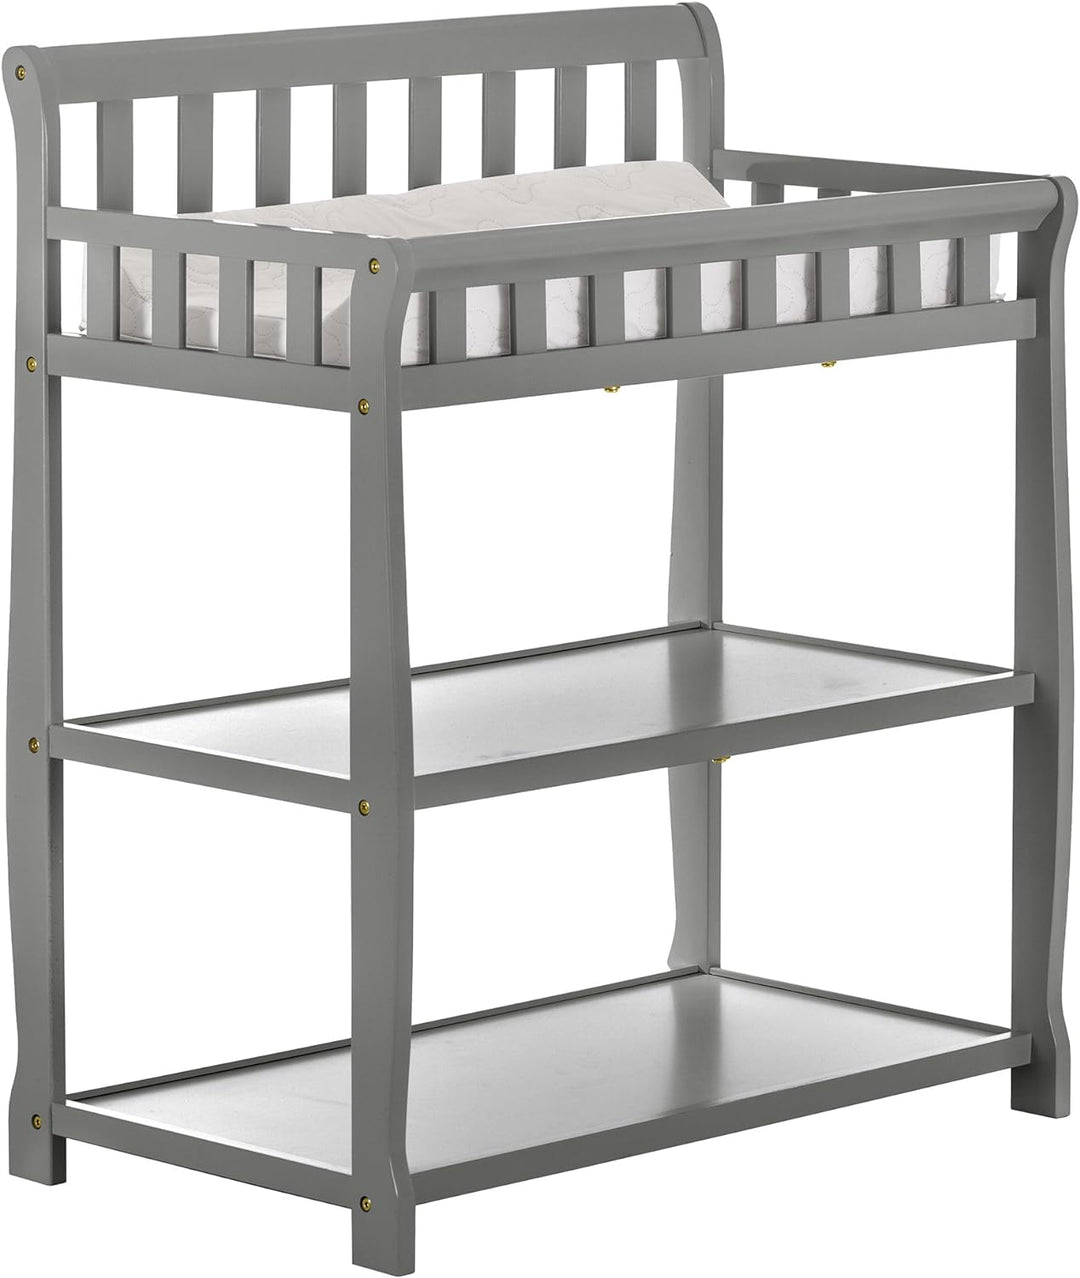 Ashton Changing Table, Steel Grey 34X20X40 Inch (Pack of 1)